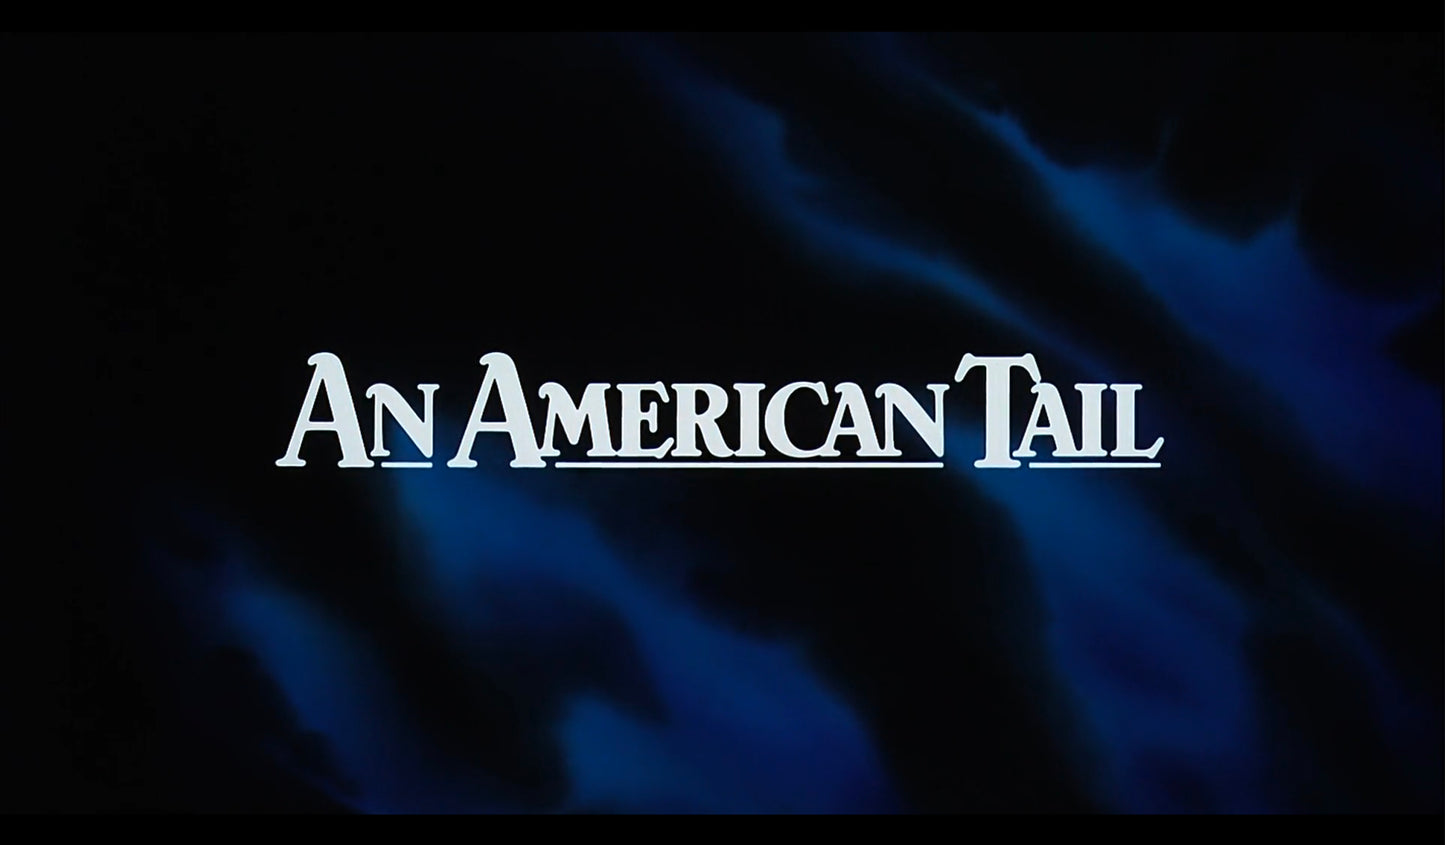 An American Tail by Steven Spielberg and Don Bluth Original Production Animation Background from the Opening Title 1986 1